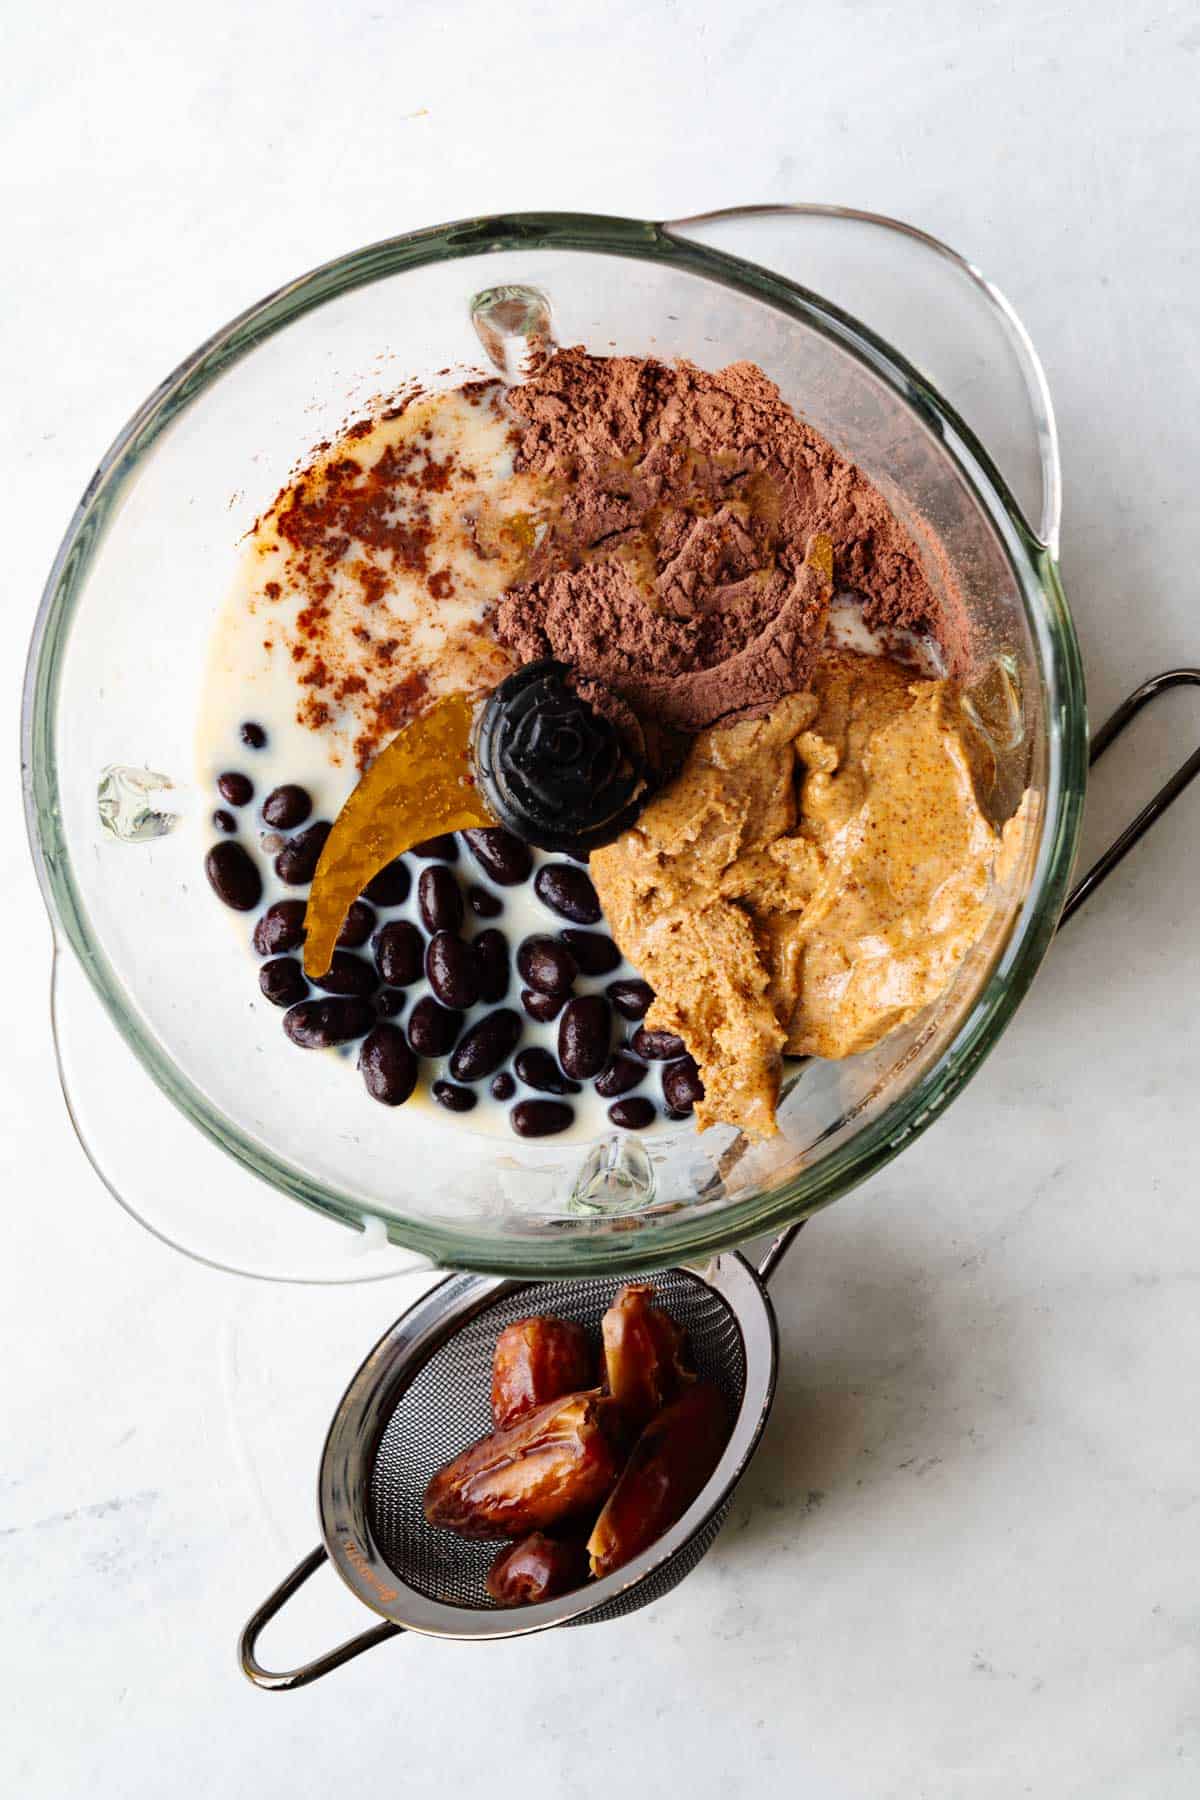 Almond butter, nondairy milk, black beans, cocoa powder, and vanilla extract in the glass canister of a food processor next to a mesh sieve with pitted dates.